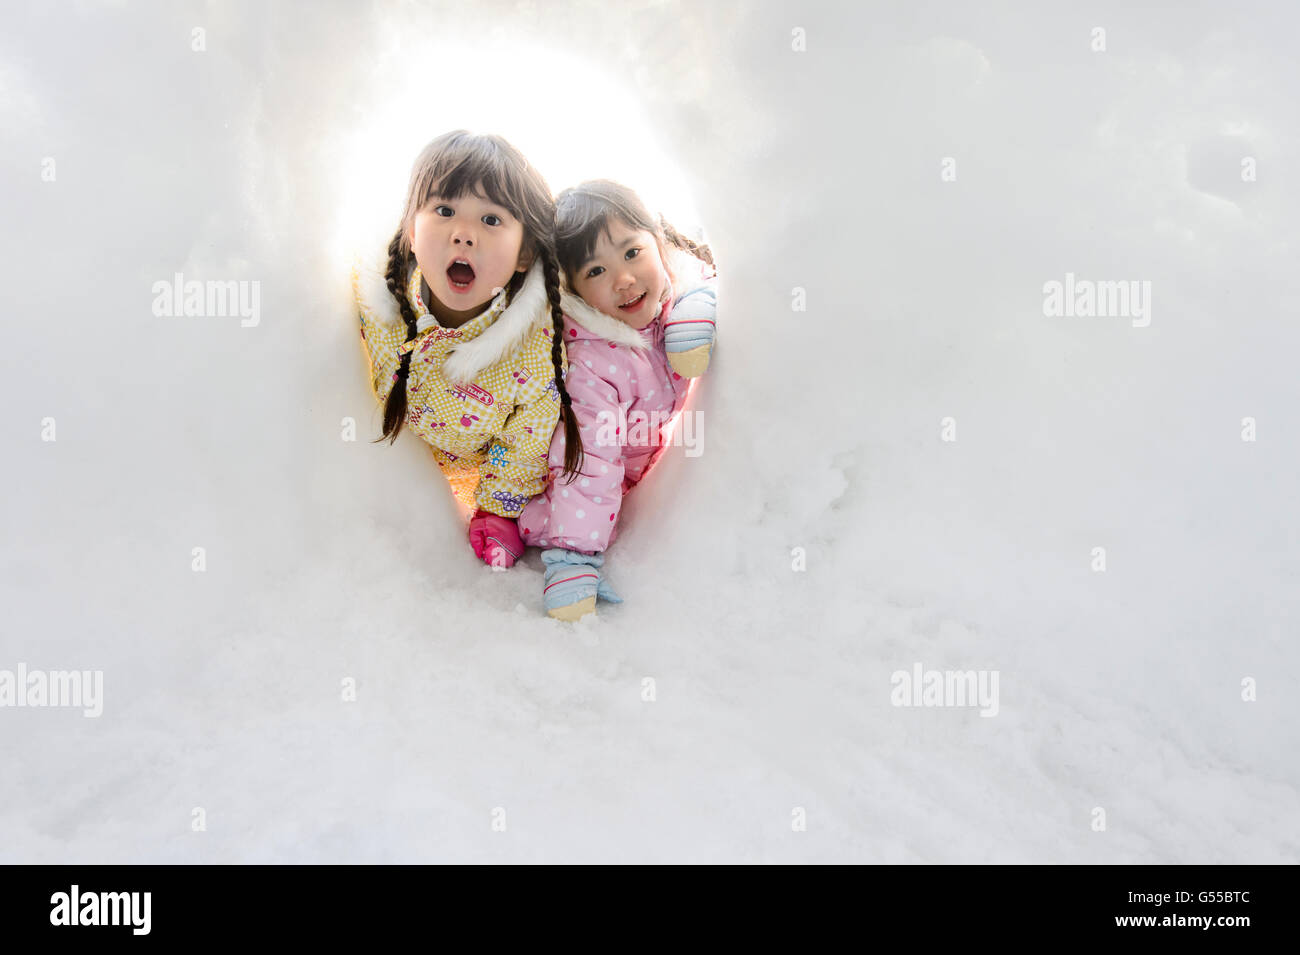 Kids playing in the snow Stock Photo